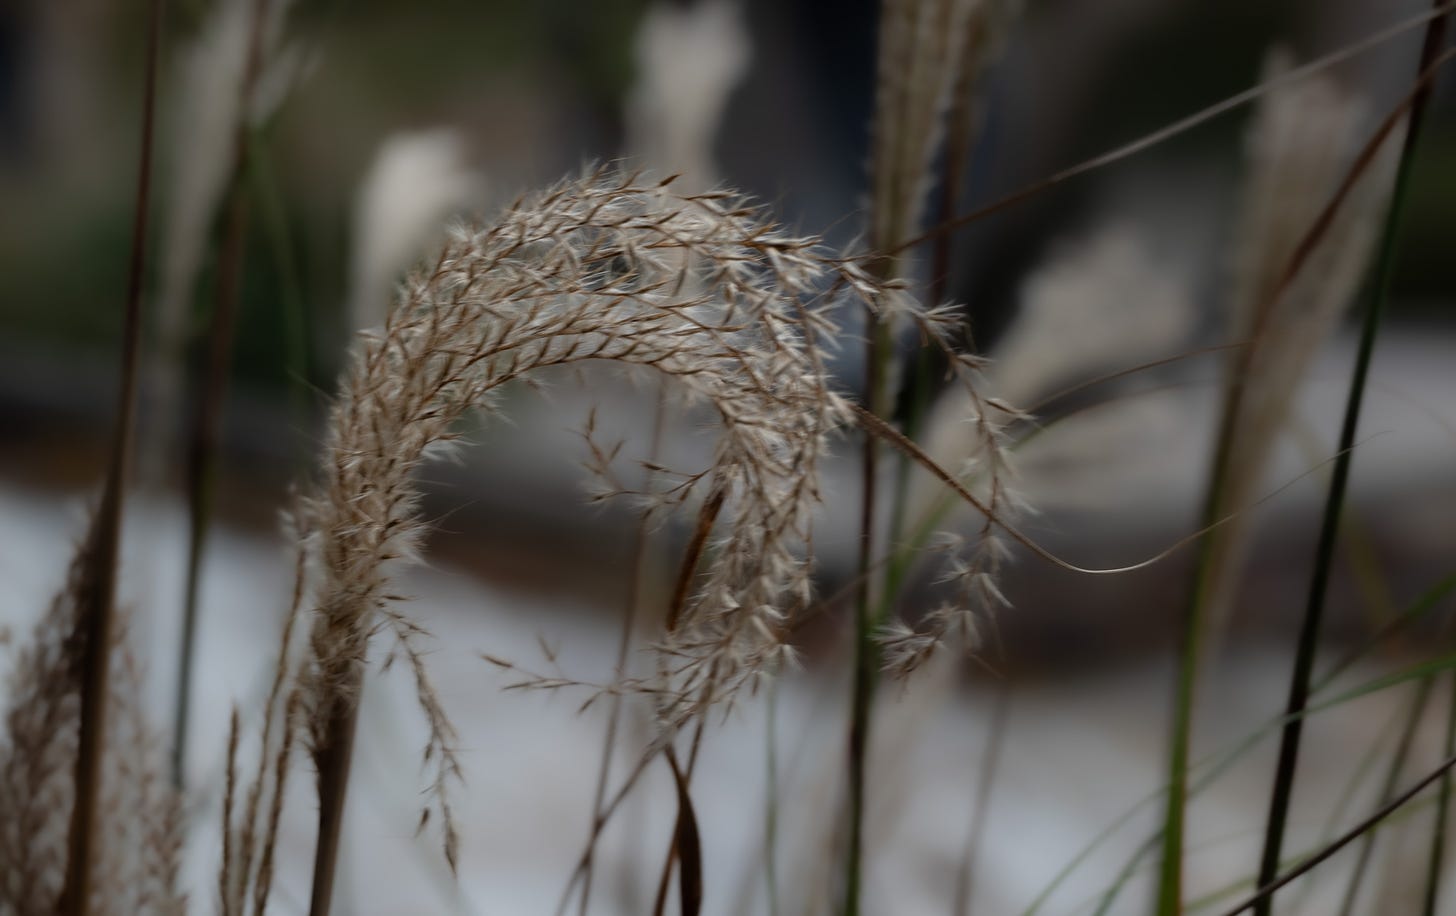 greyish brown grasses against a blurred background